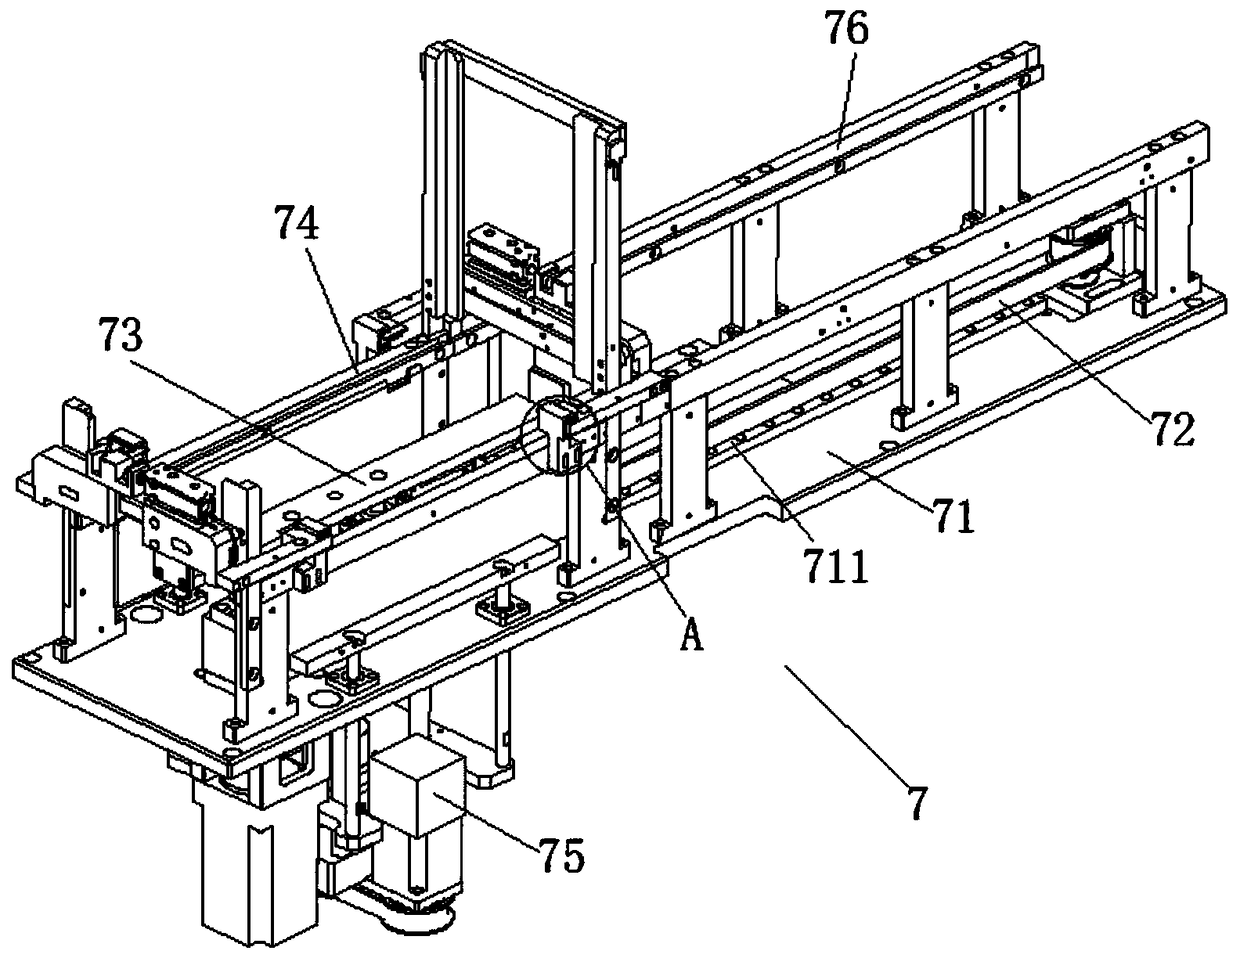 Continuous and automatic tray collecting and dispensing mechanism of detection equipment